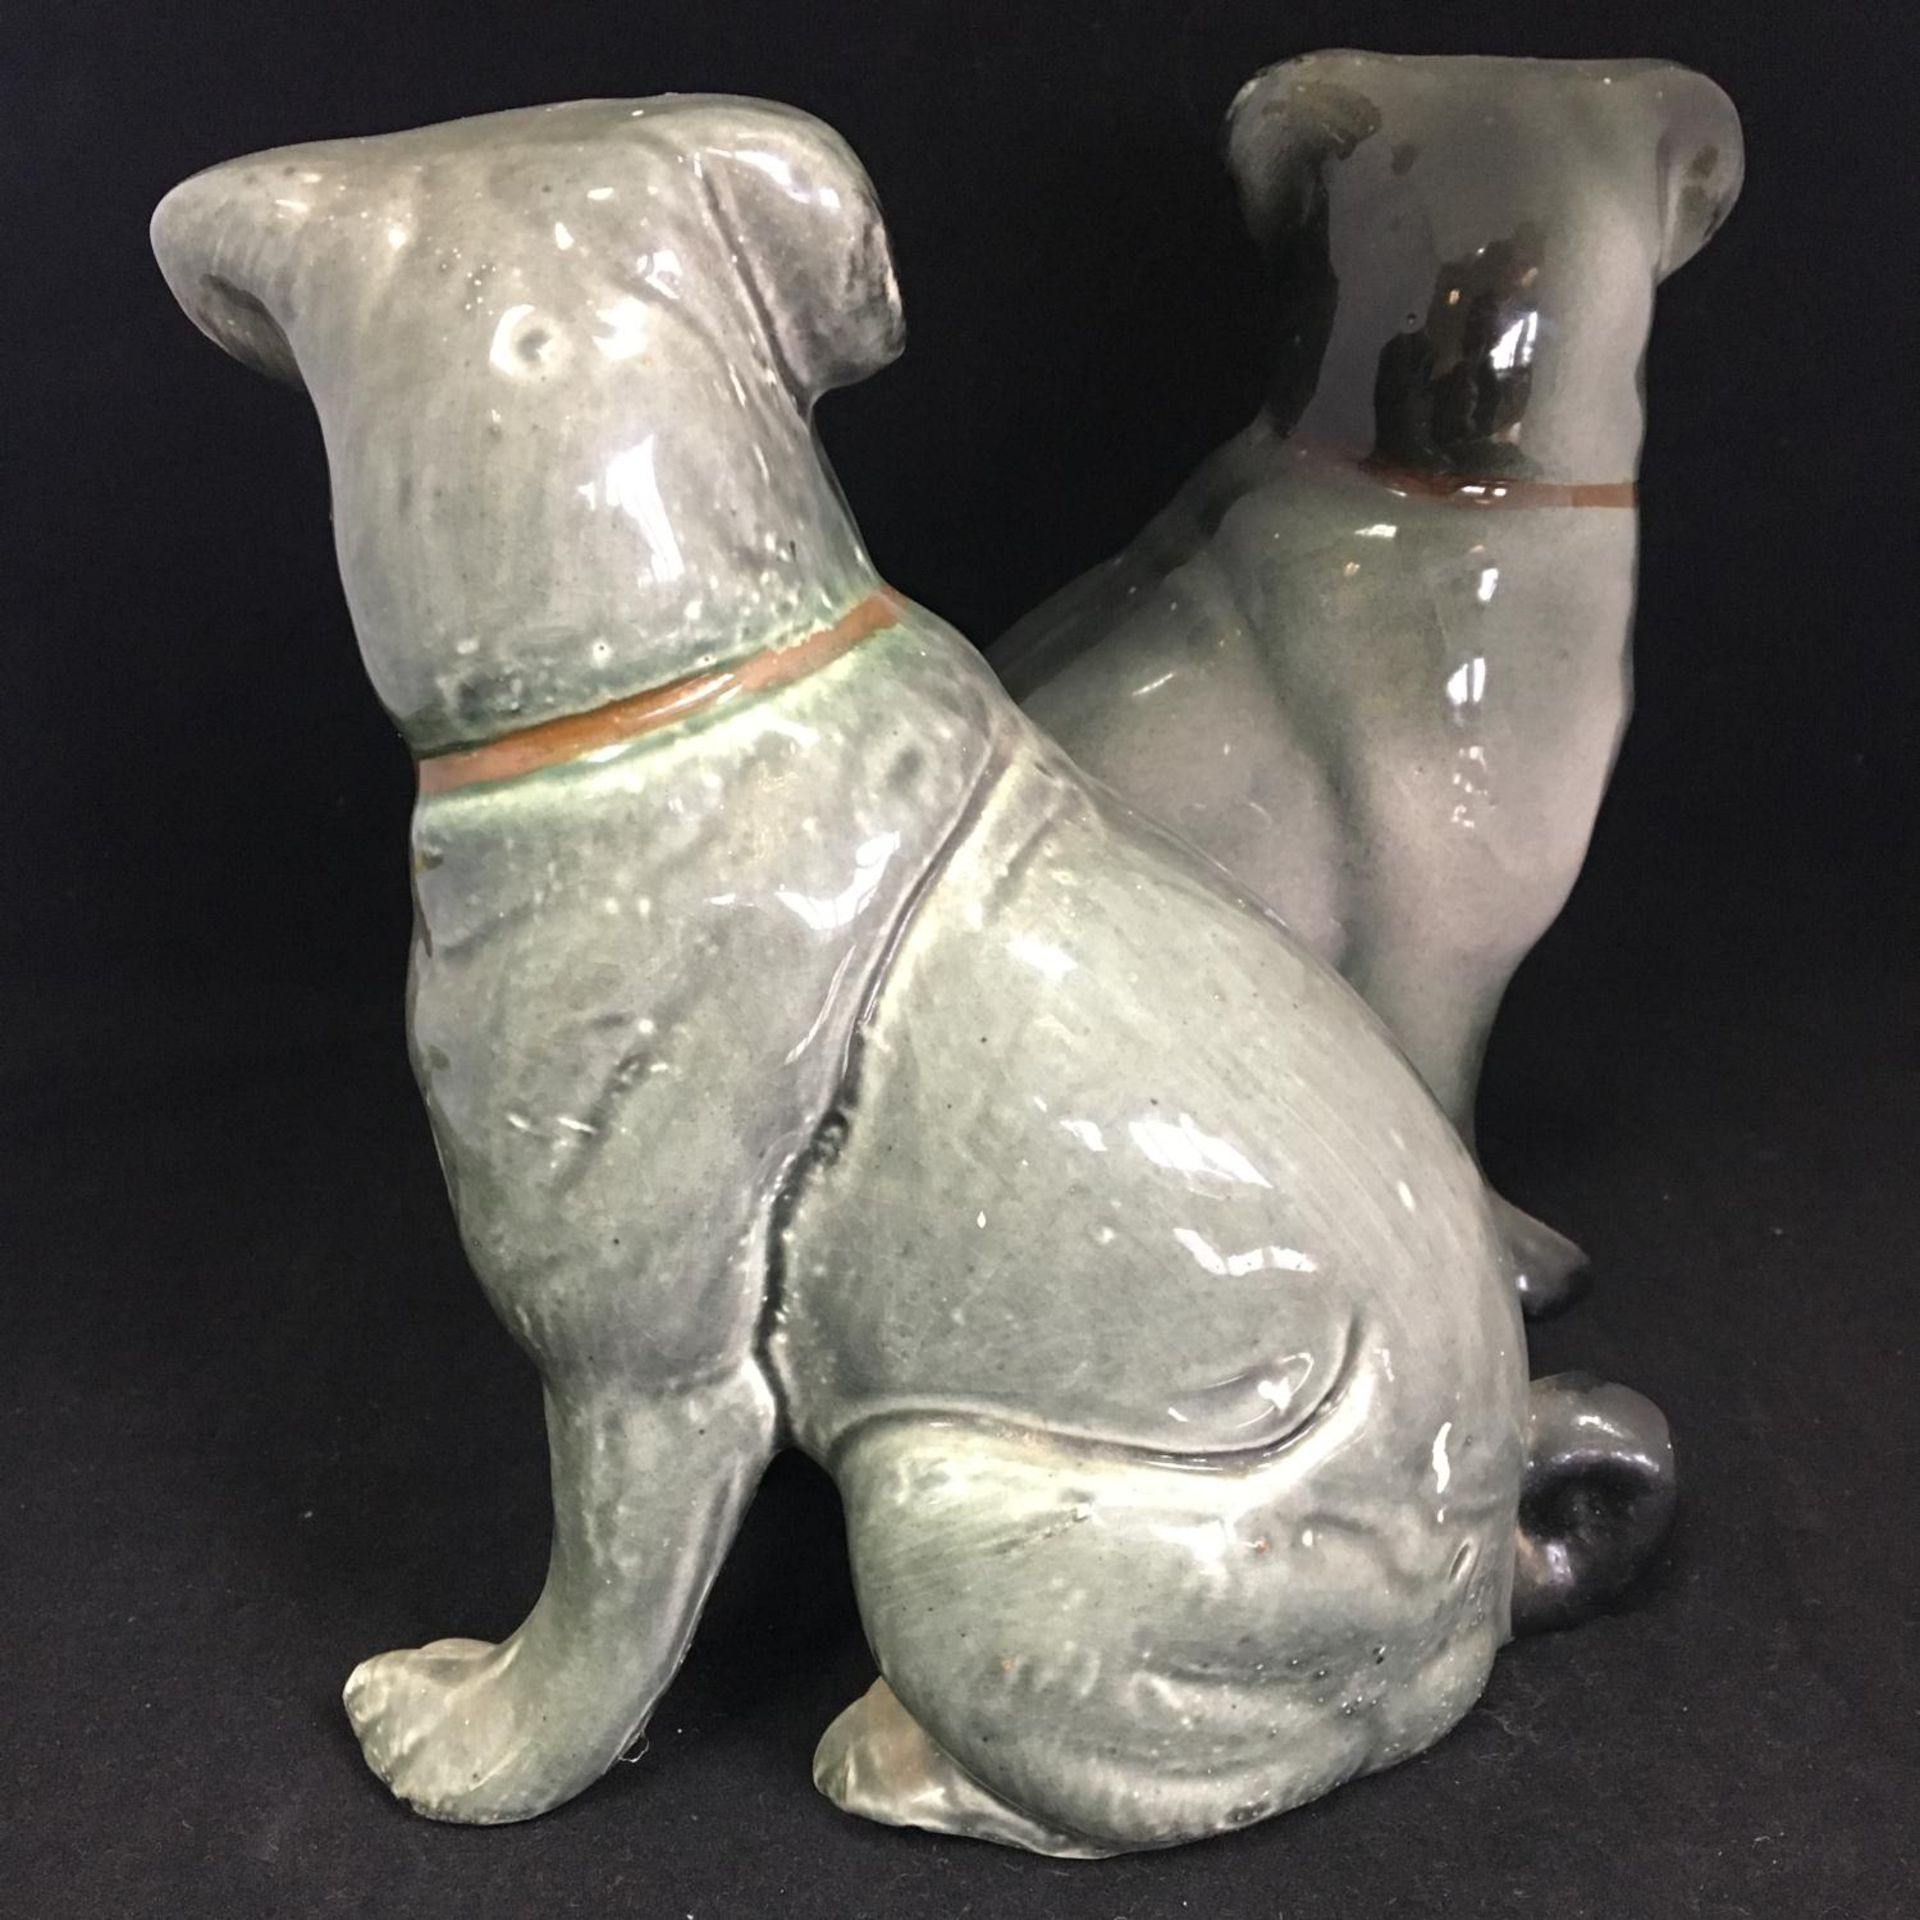 Antique Victorian era ceramic seated pugs. Matched (not an exact pair). Standing around 20cm high. - Image 3 of 6